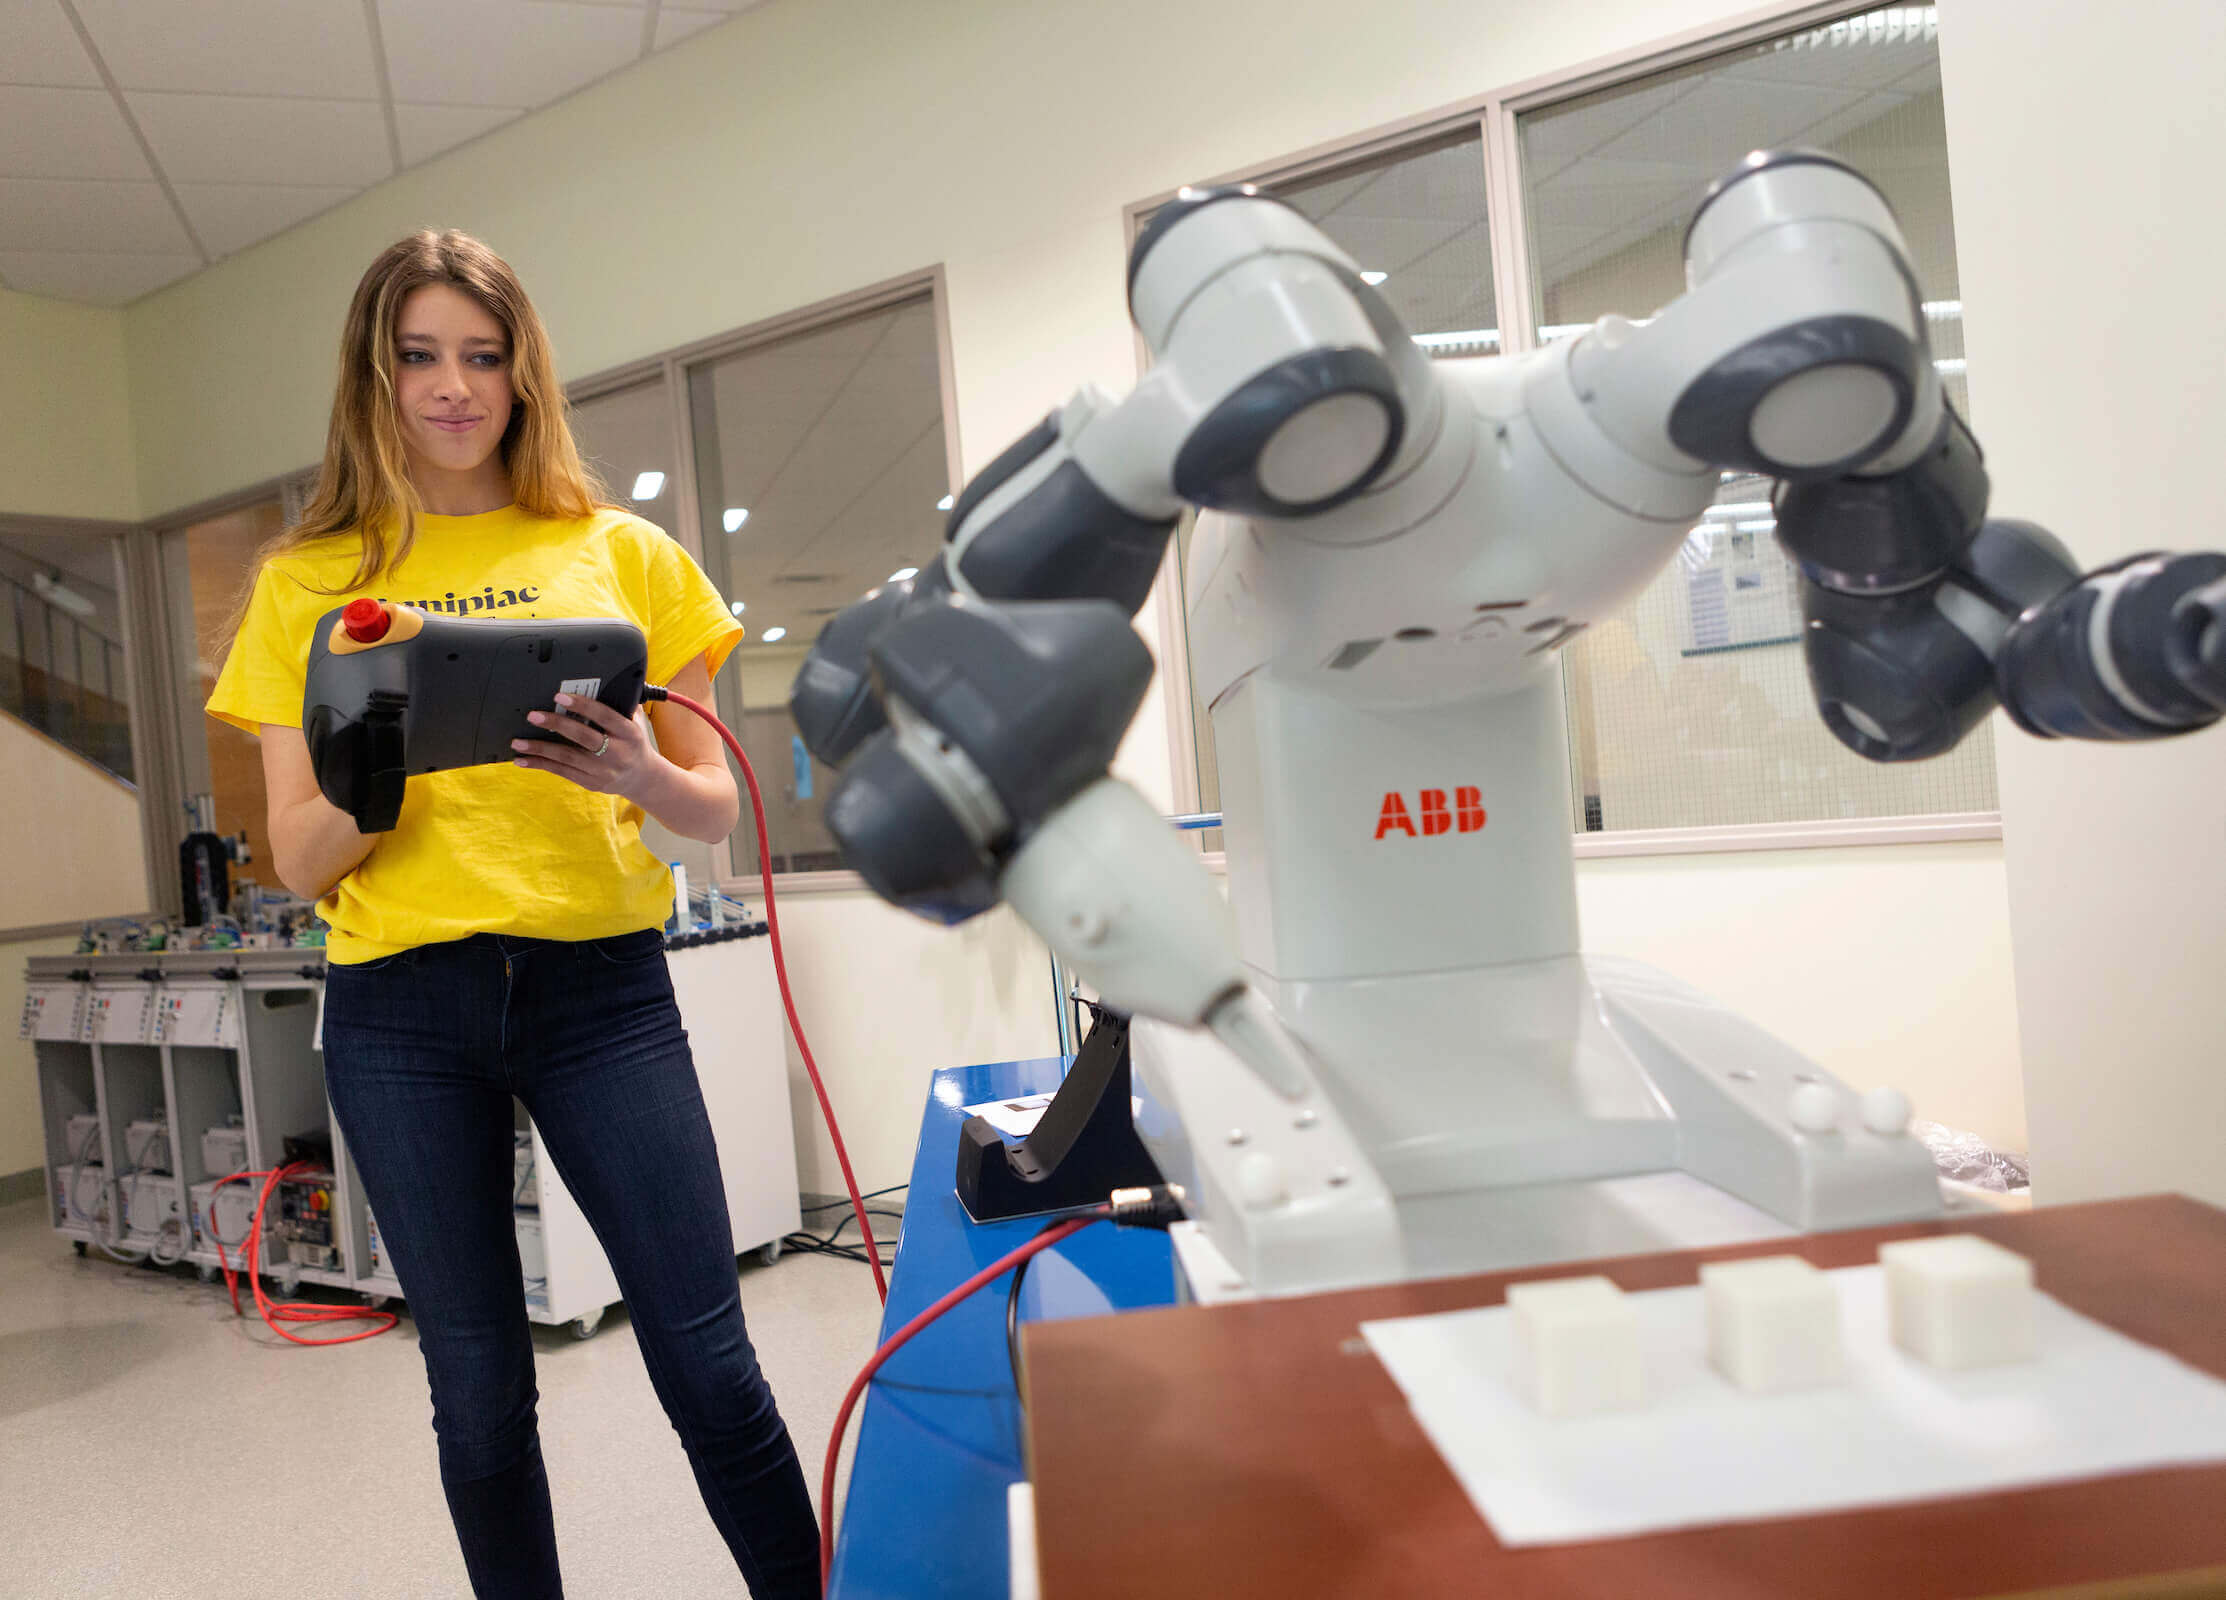 A female student operates a remote for a robot